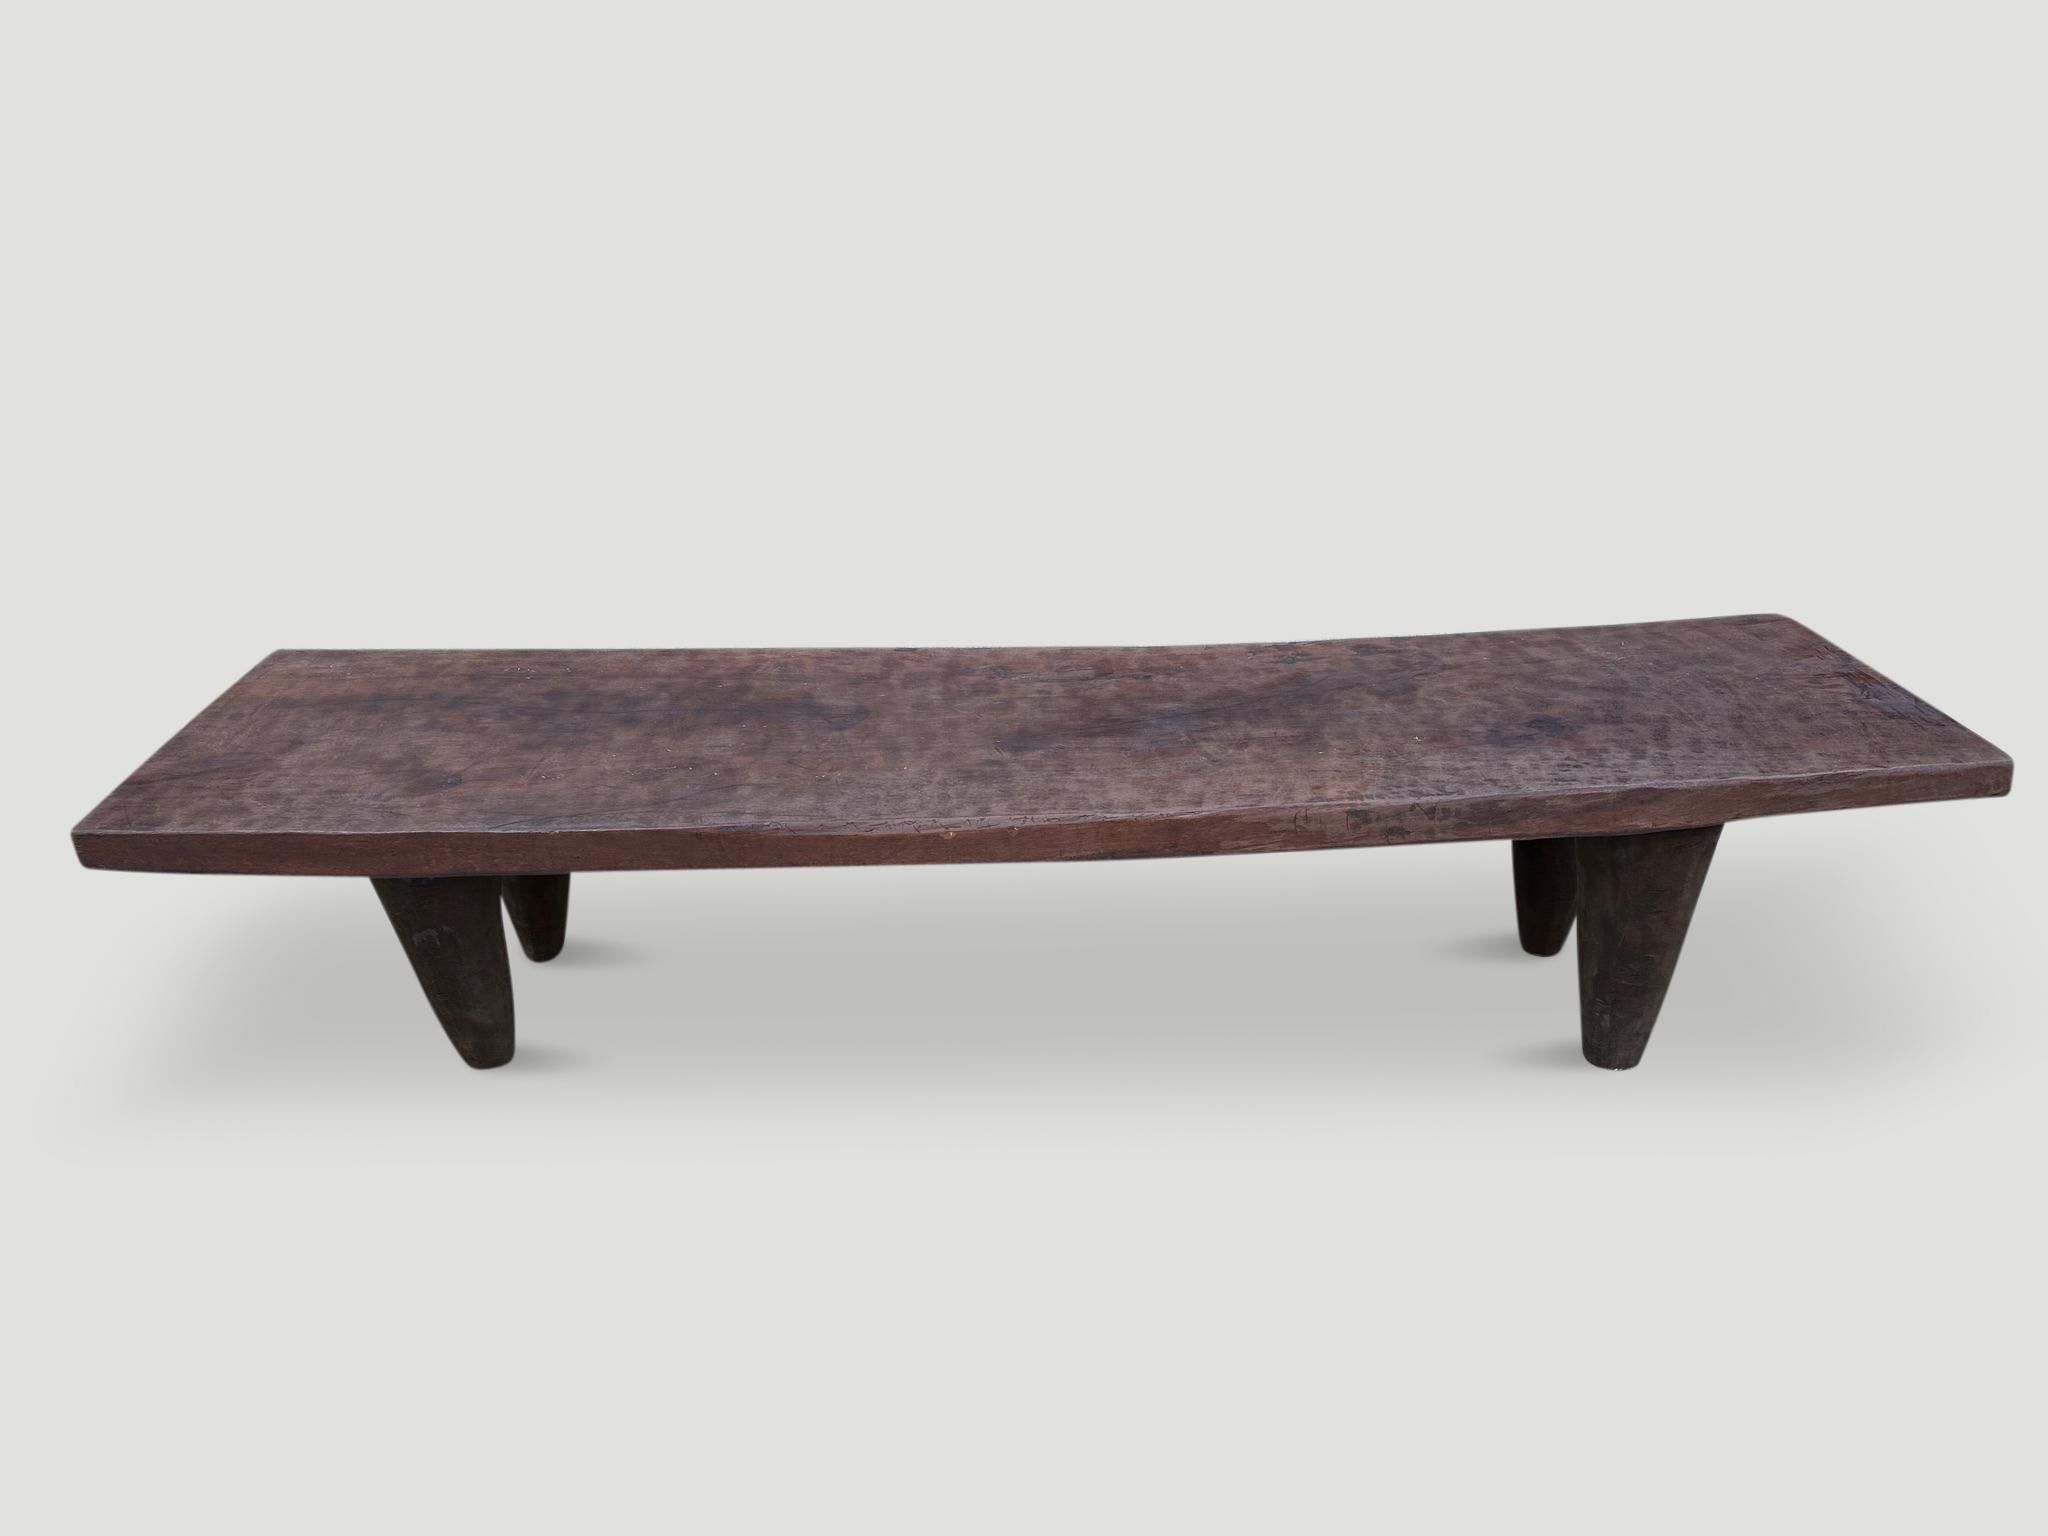 Rare antique coffee table or bench hand carved by the Senufo tribes from a single block of Iroko wood, native to the west coast of Africa. The wood is tough, dense and very durable. Shown with carved cone style legs. We only source the best. This